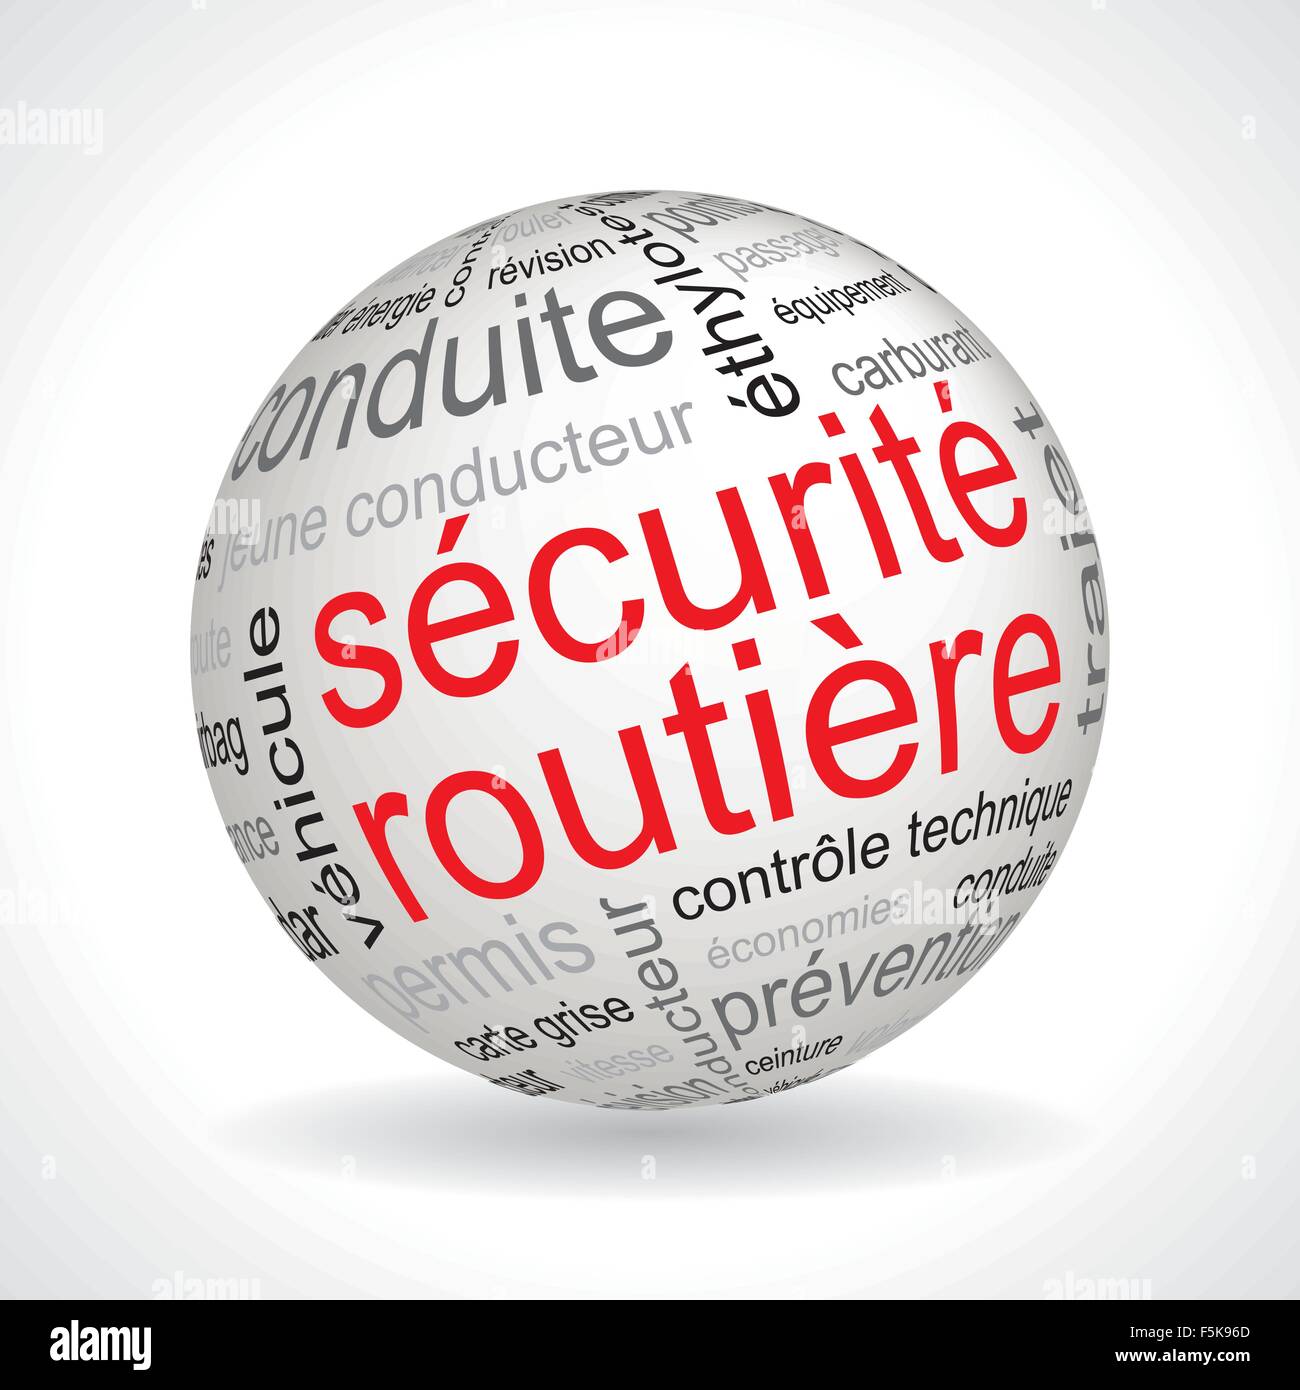 French road safety theme sphere with keywords full vector Stock Vector